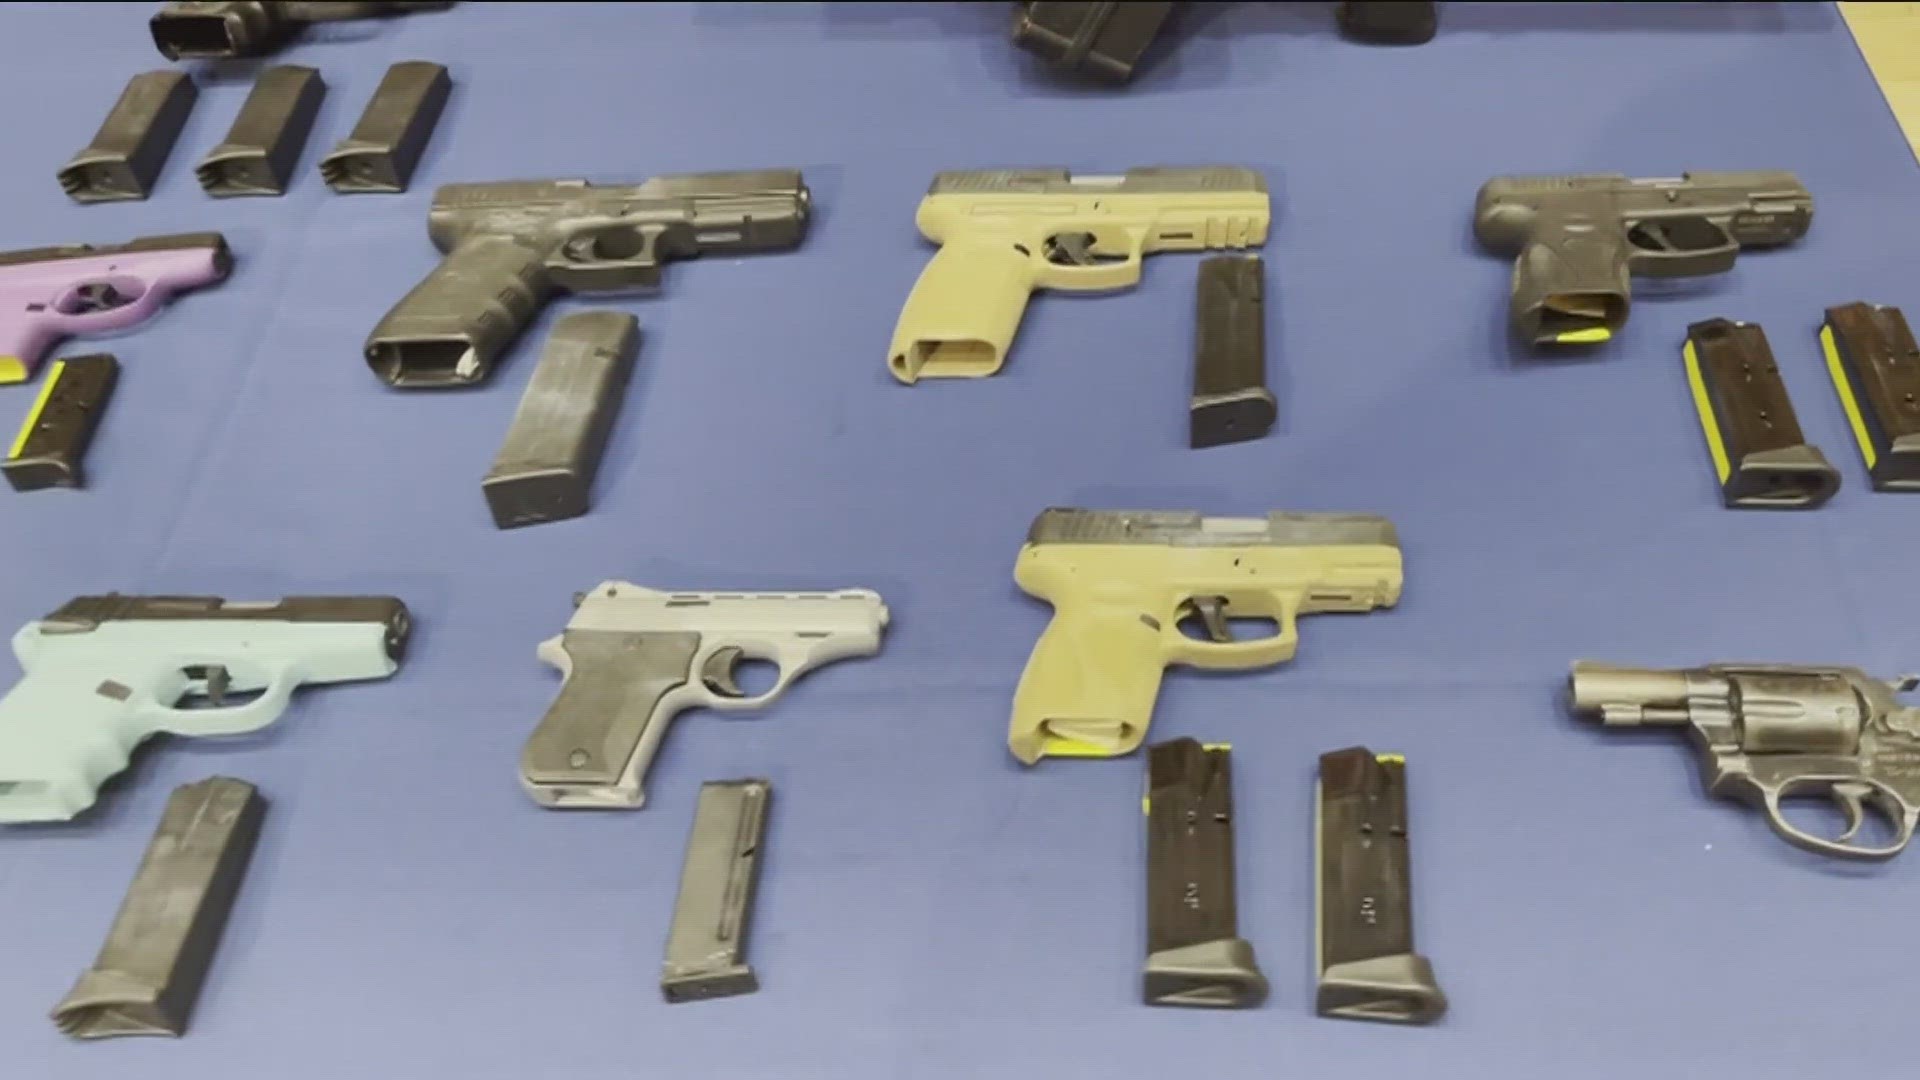 Ghost guns are untraceable firearms that can be bought online and assembled at home.